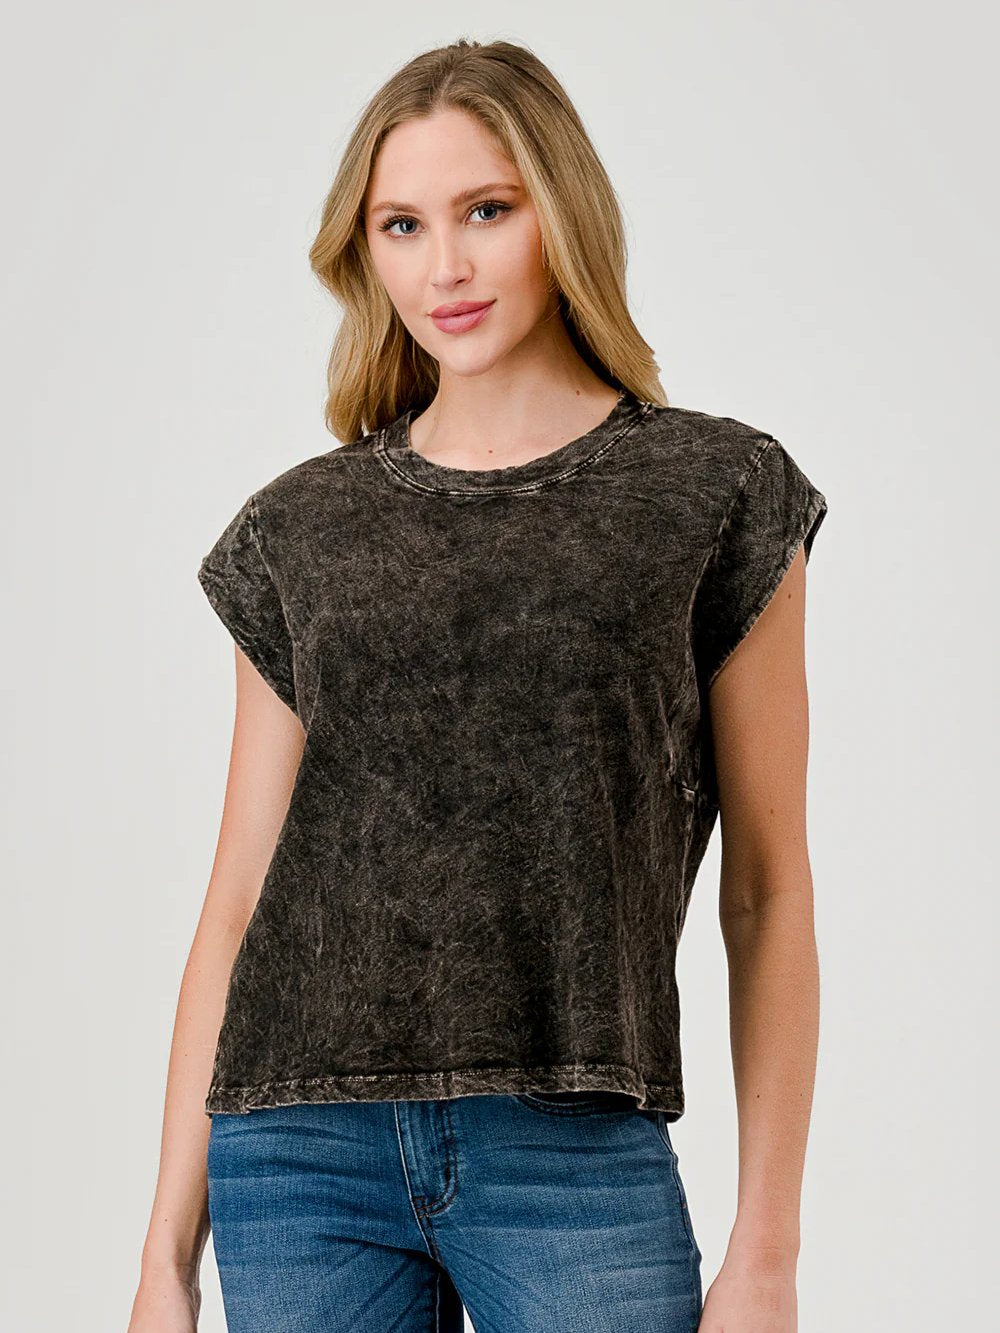 HASHTTAG MINERAL DYED MUSCLE TOP BLACK